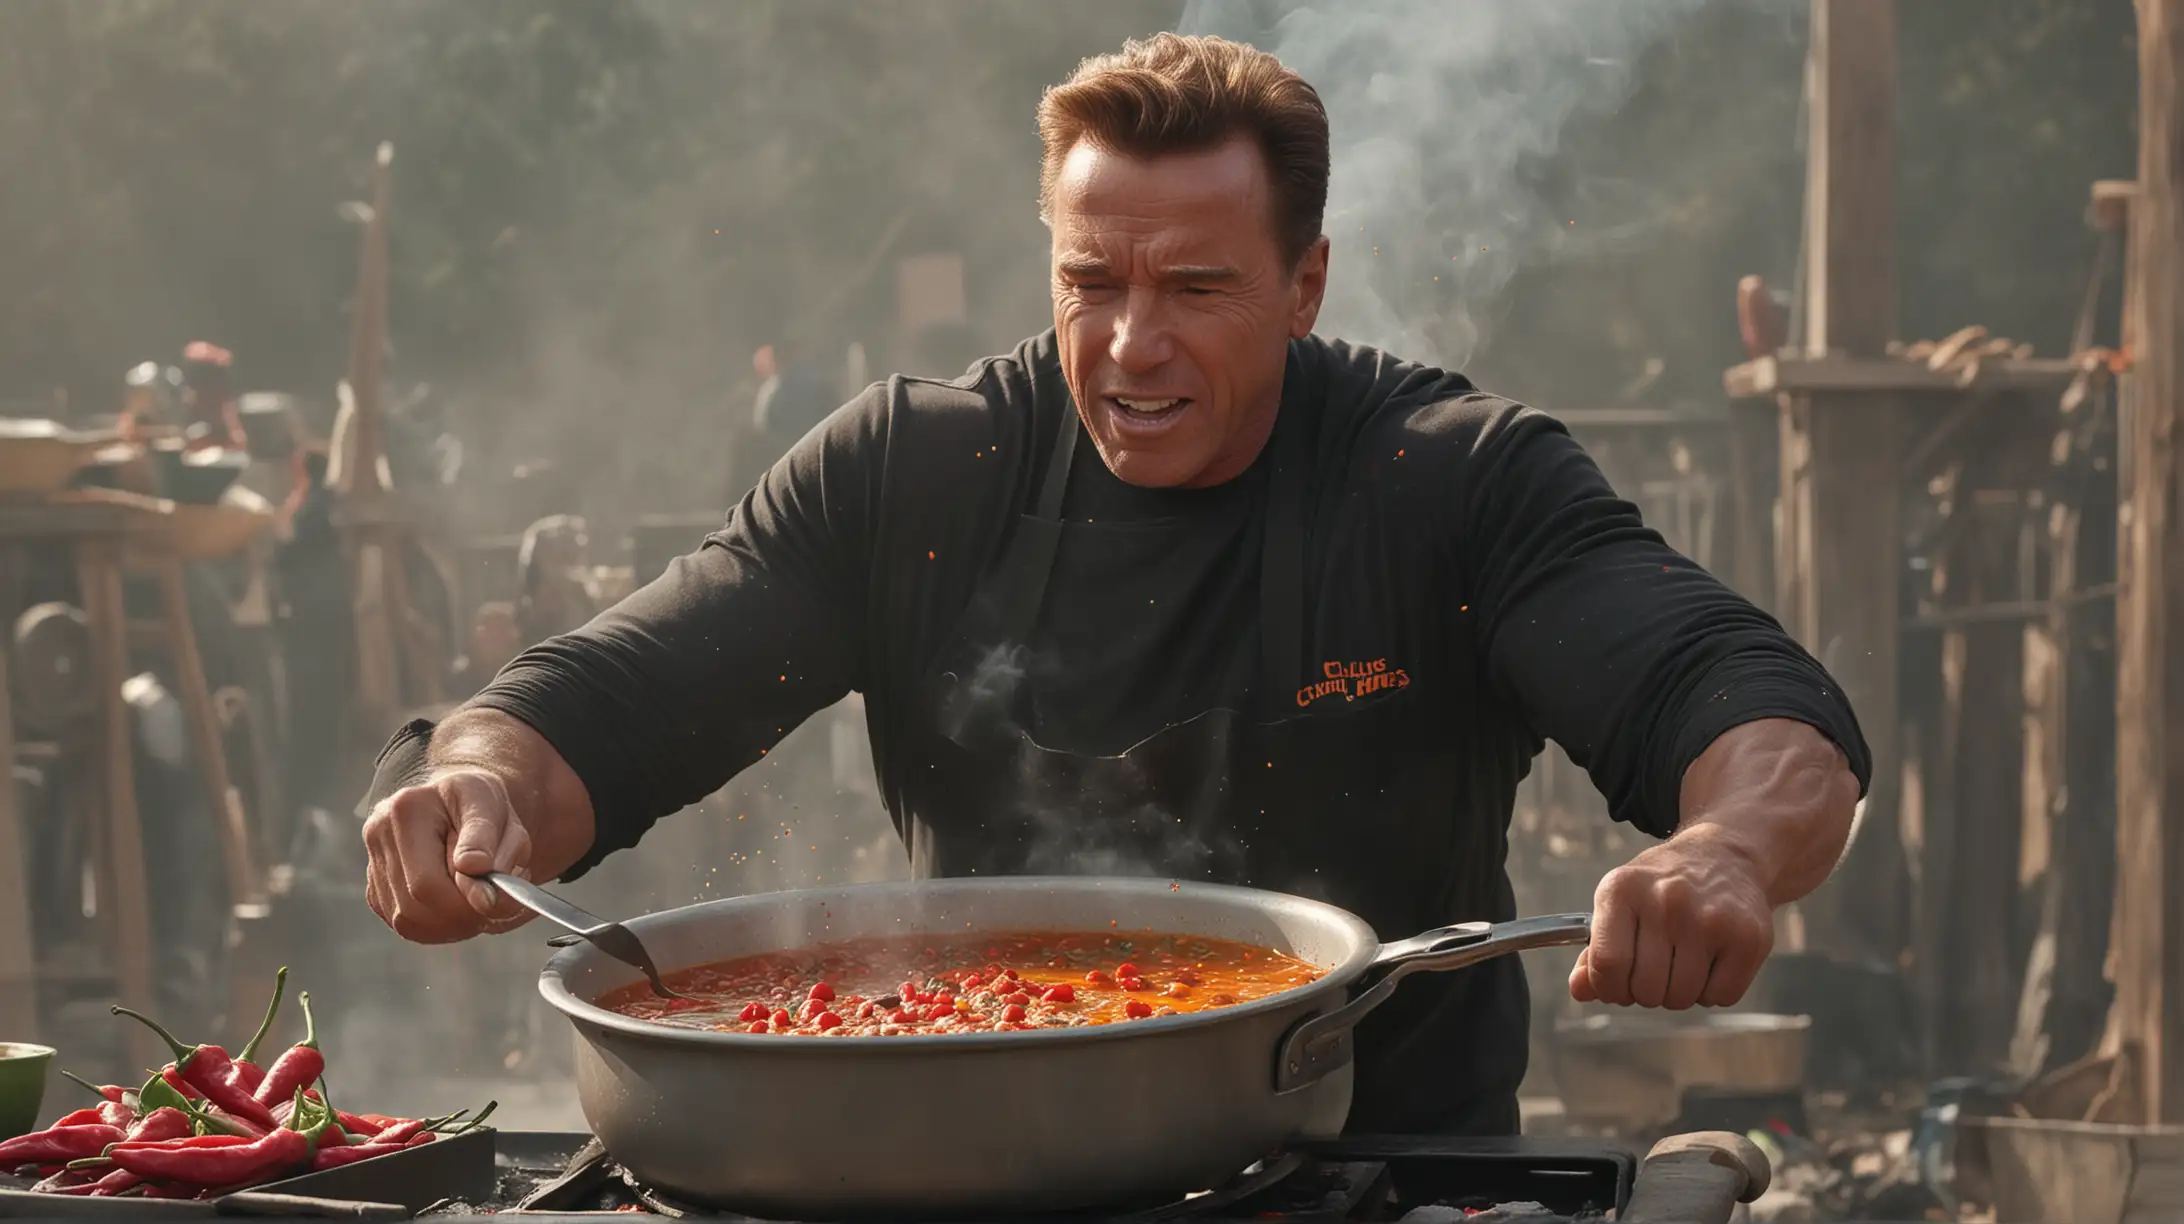 Arnold schwarzenegger making a soup on fire with red hot chilis
HD 4k
